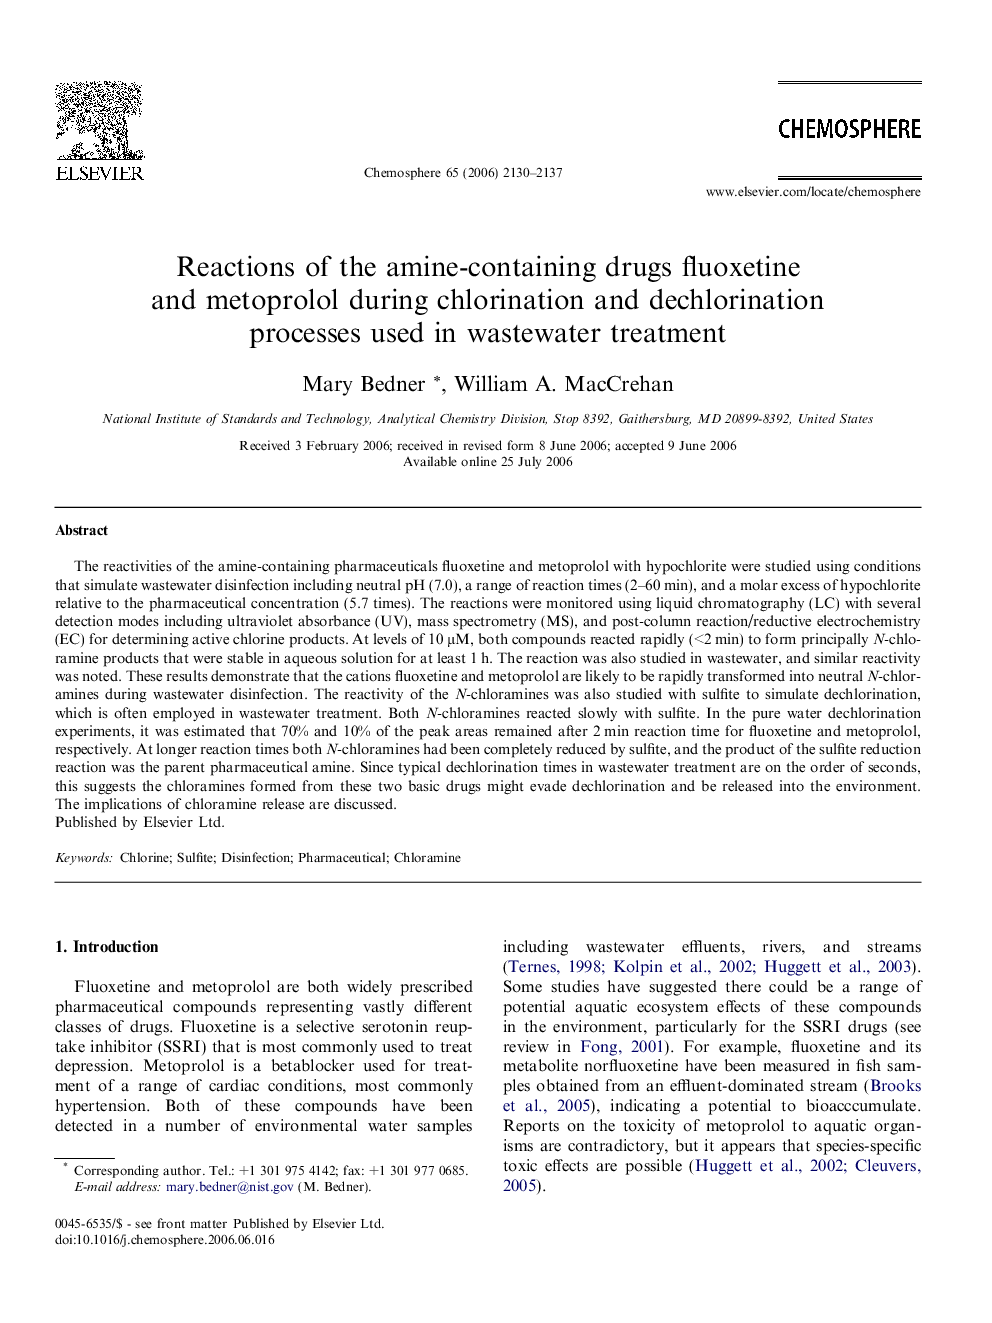 Reactions of the amine-containing drugs fluoxetine and metoprolol during chlorination and dechlorination processes used in wastewater treatment